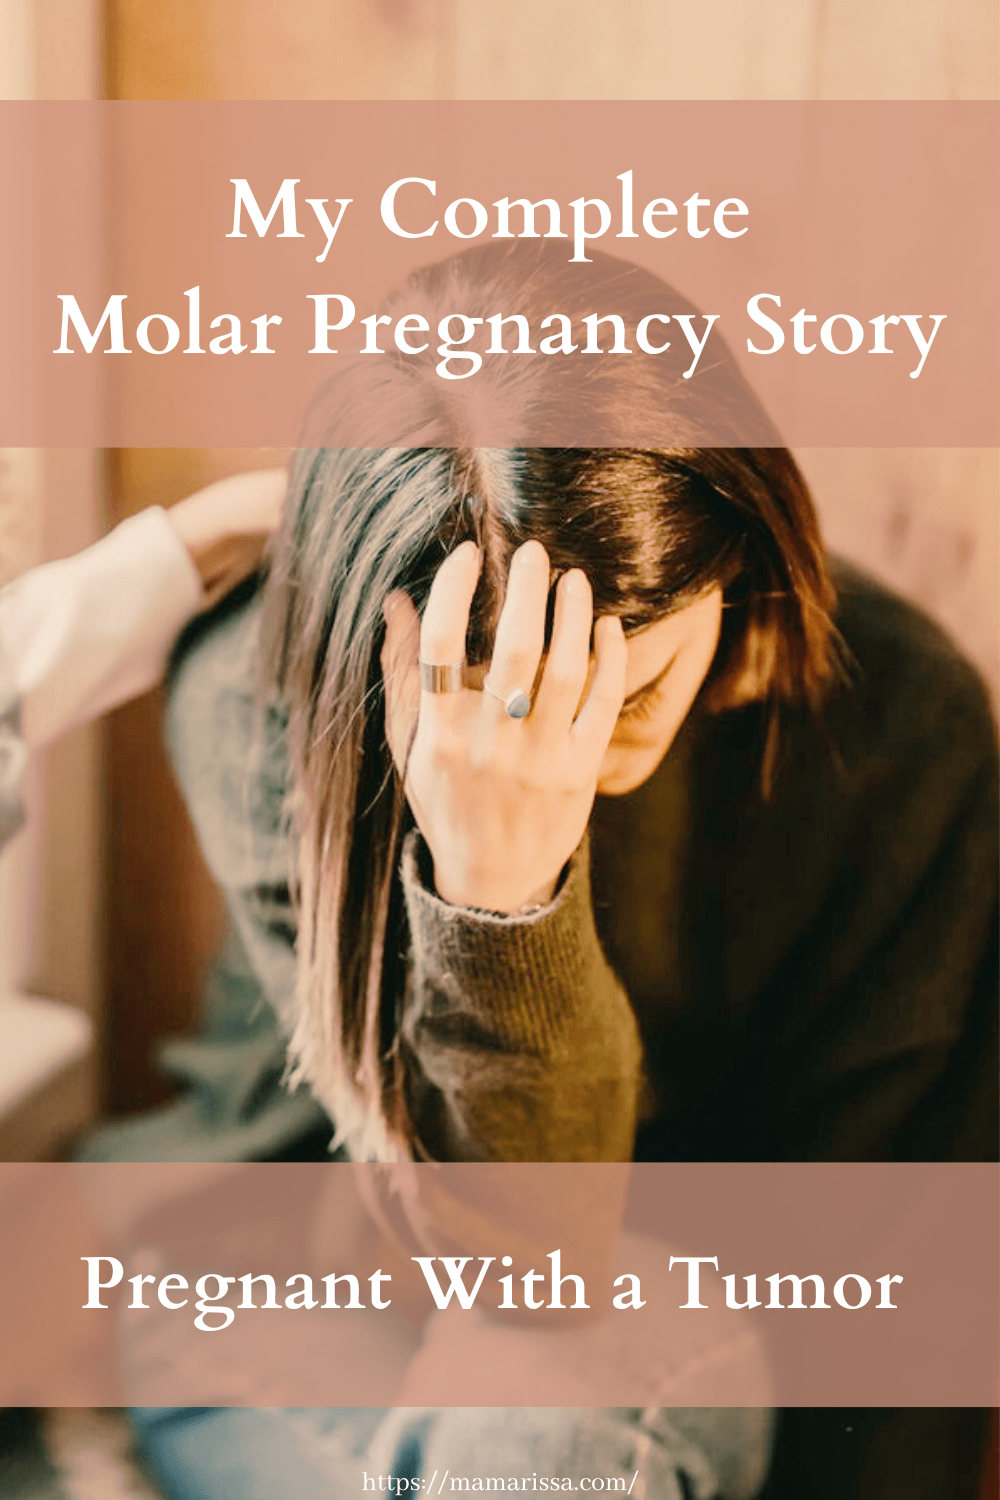 My Complete Molar Pregnancy Story: Pregnant with a Tumor